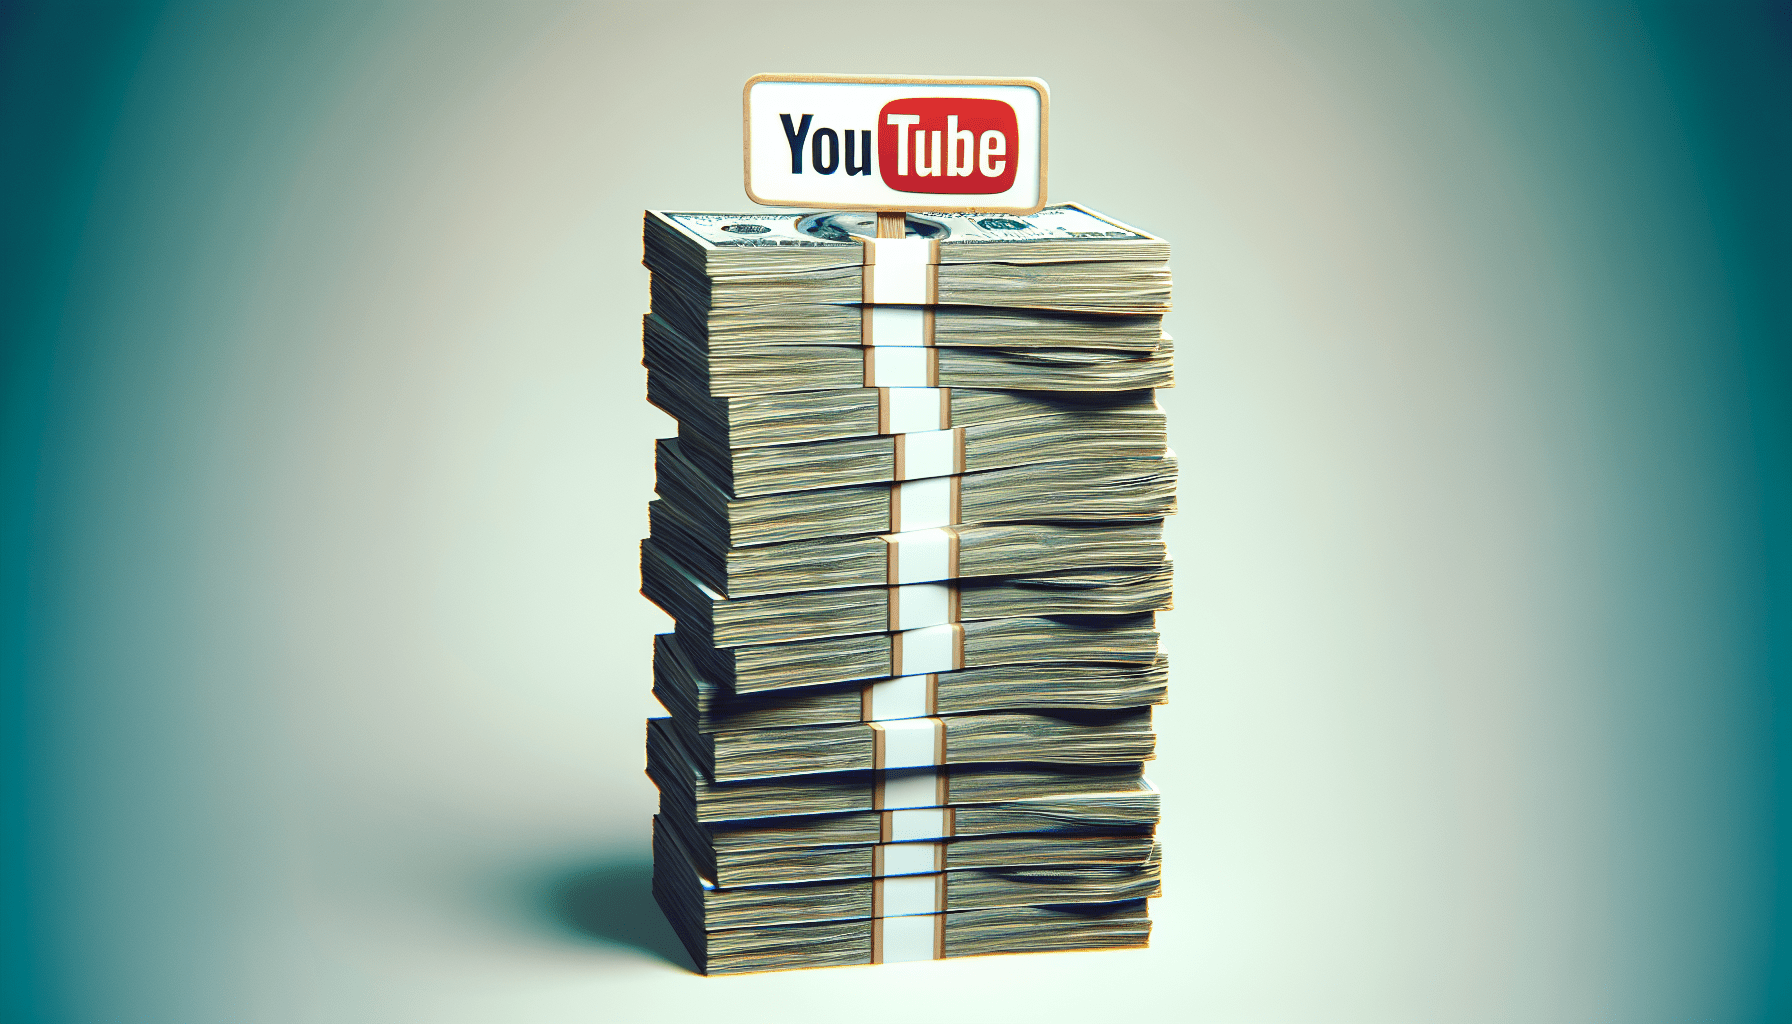 Can I Earn Money From YouTube Without Making Videos?